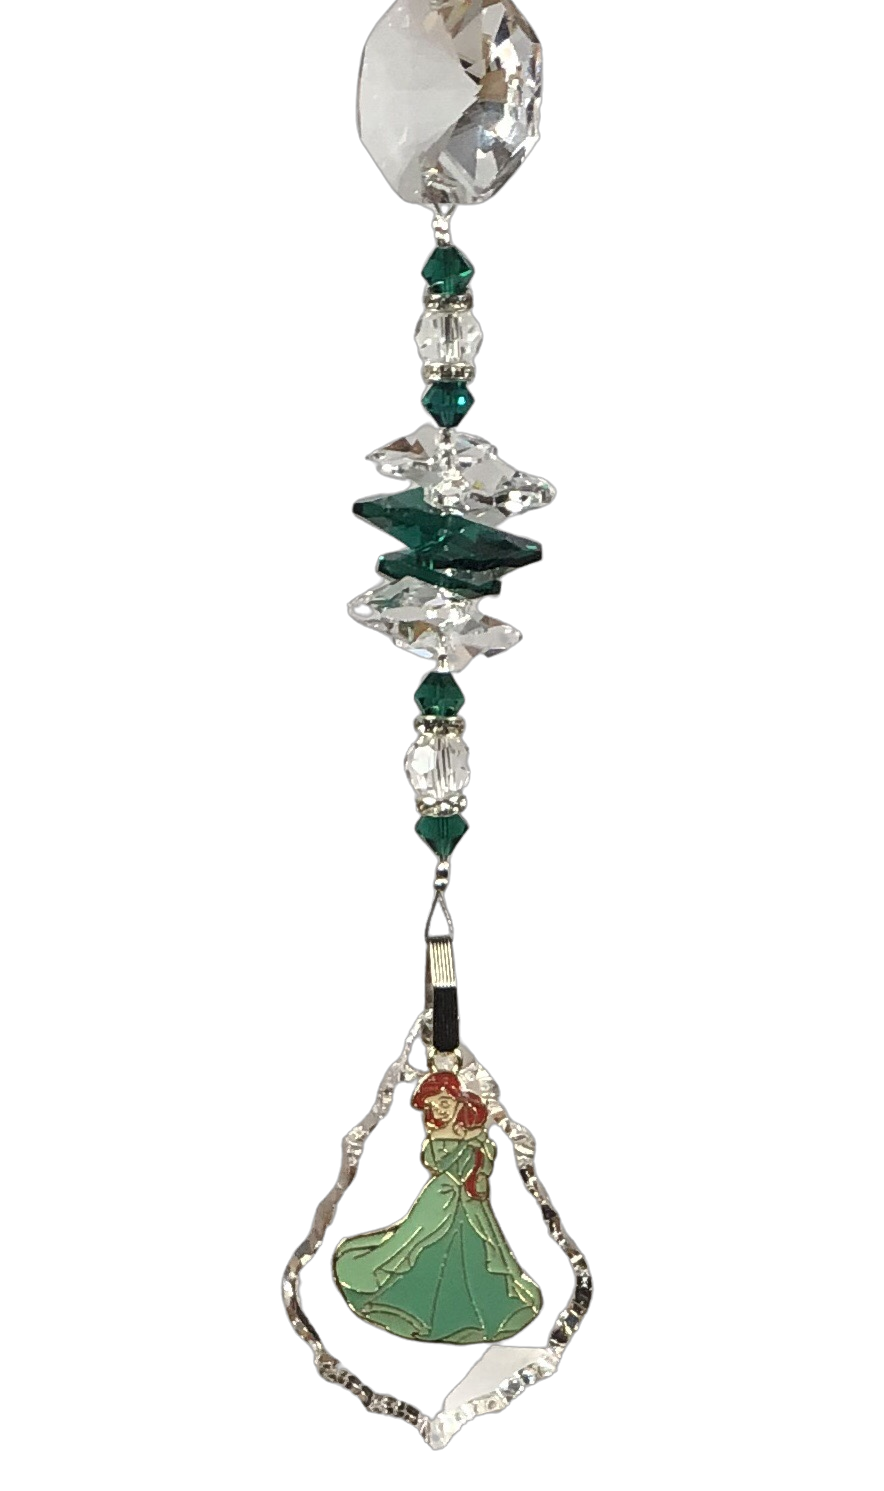 The Little Mermaid - Ariel crystal suncatcher, decorated with 50mm Starburst crystal and malachite gemstone.